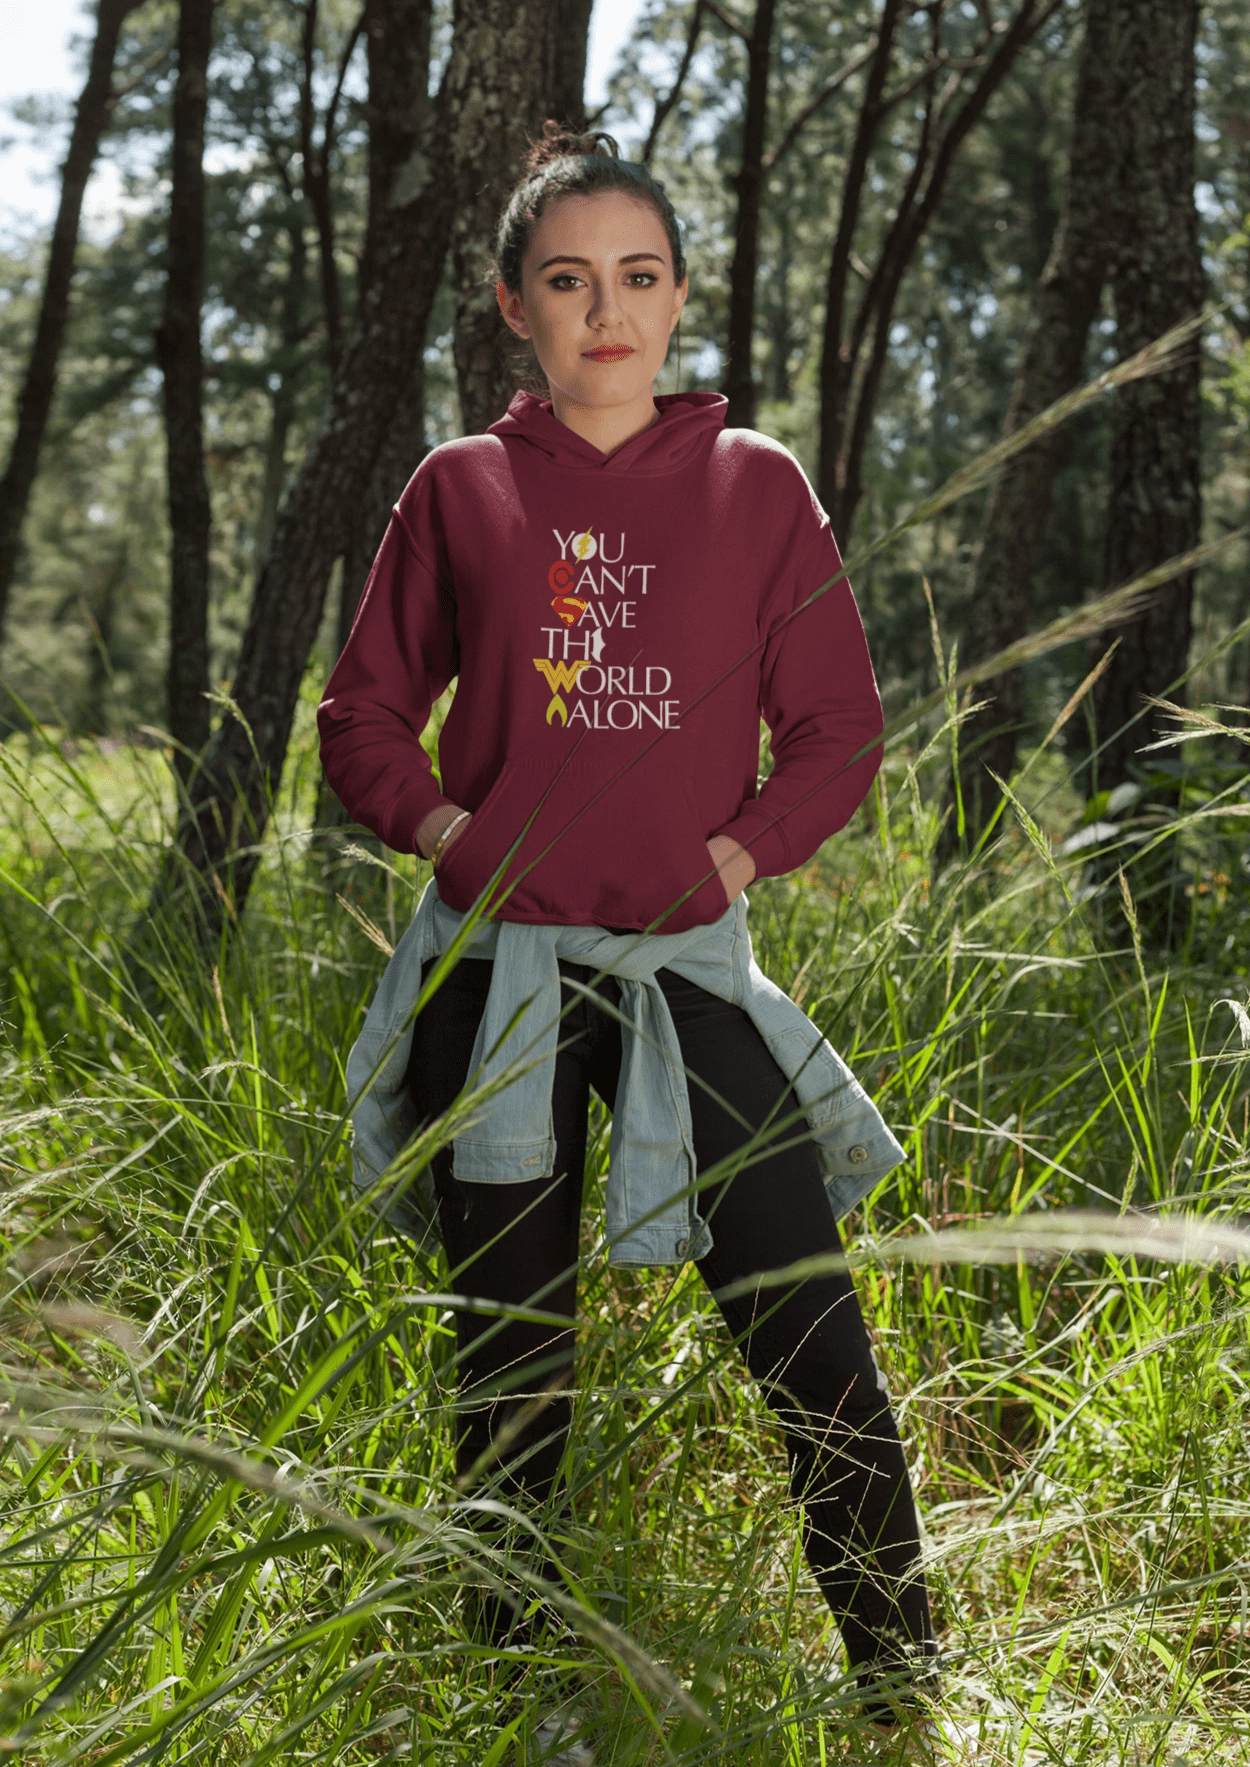 YOU CAN'T SAVE THE WORLD ALONE - WINTER HOODIES MAROON